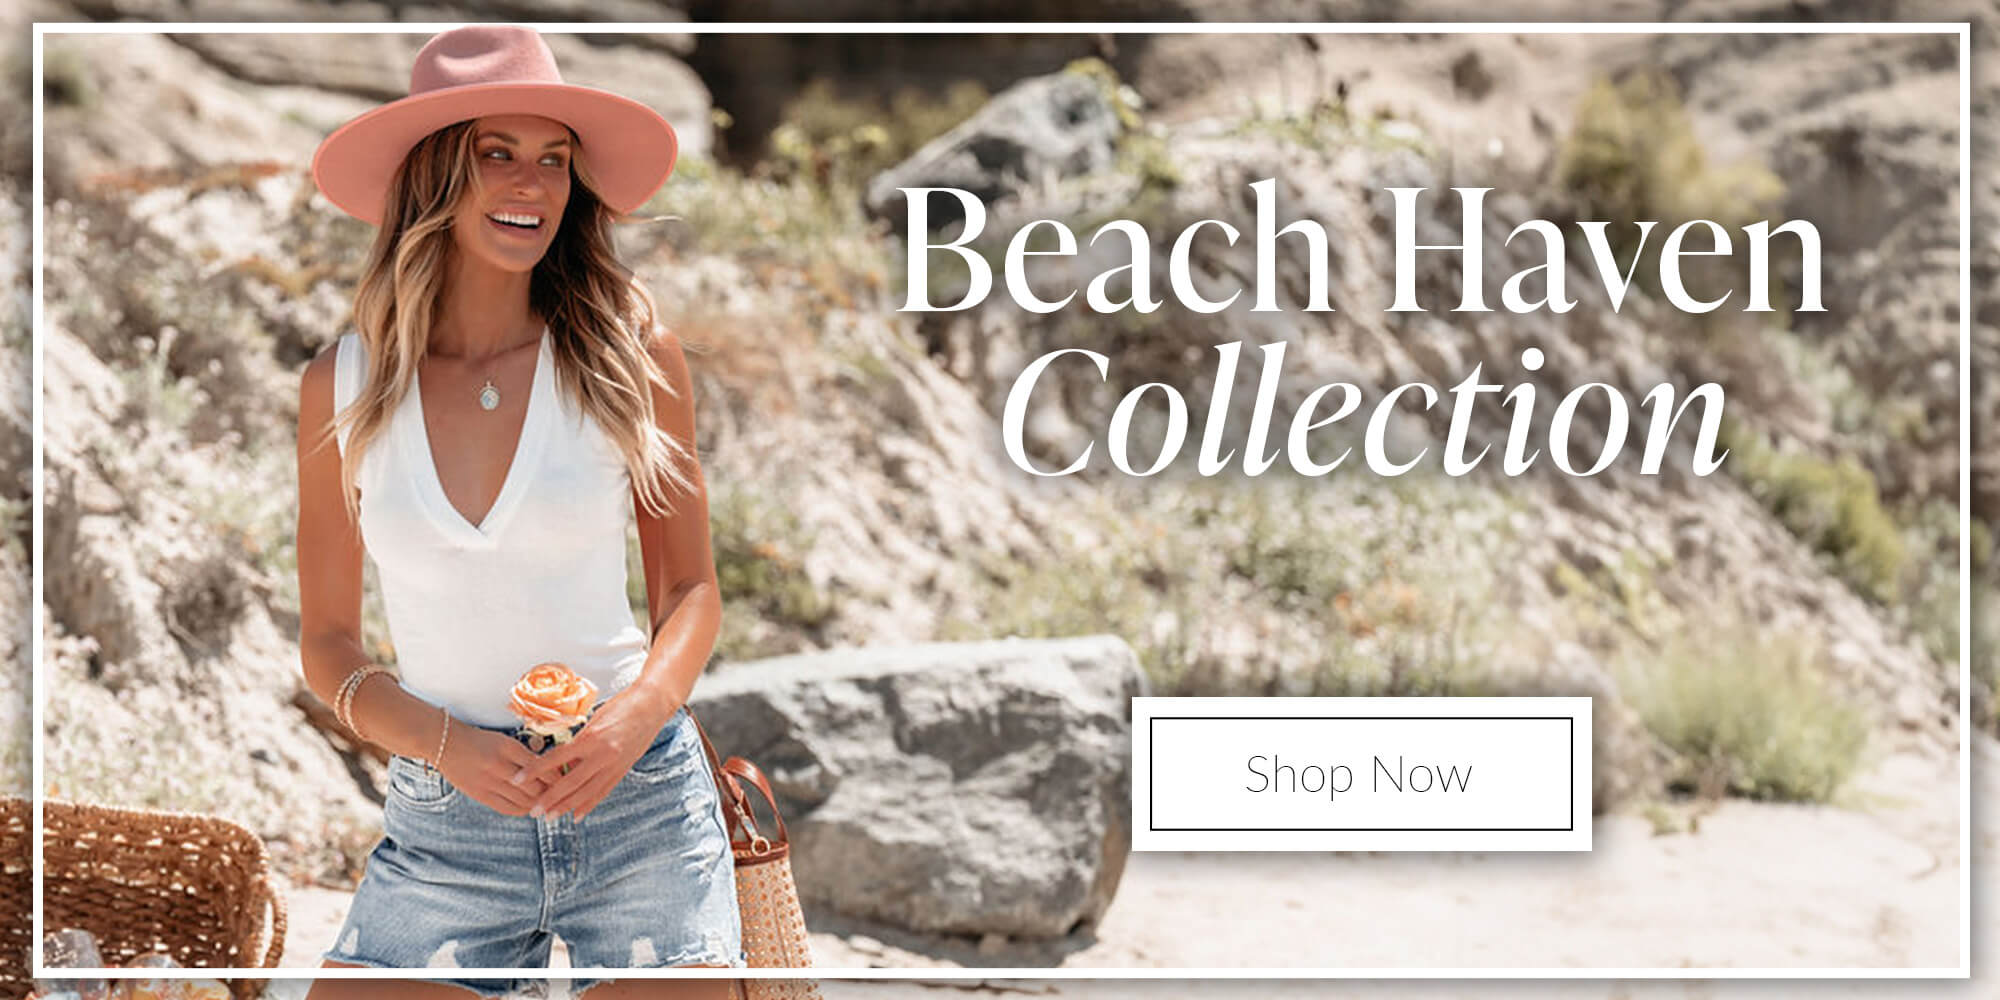 beach haven collection shop now